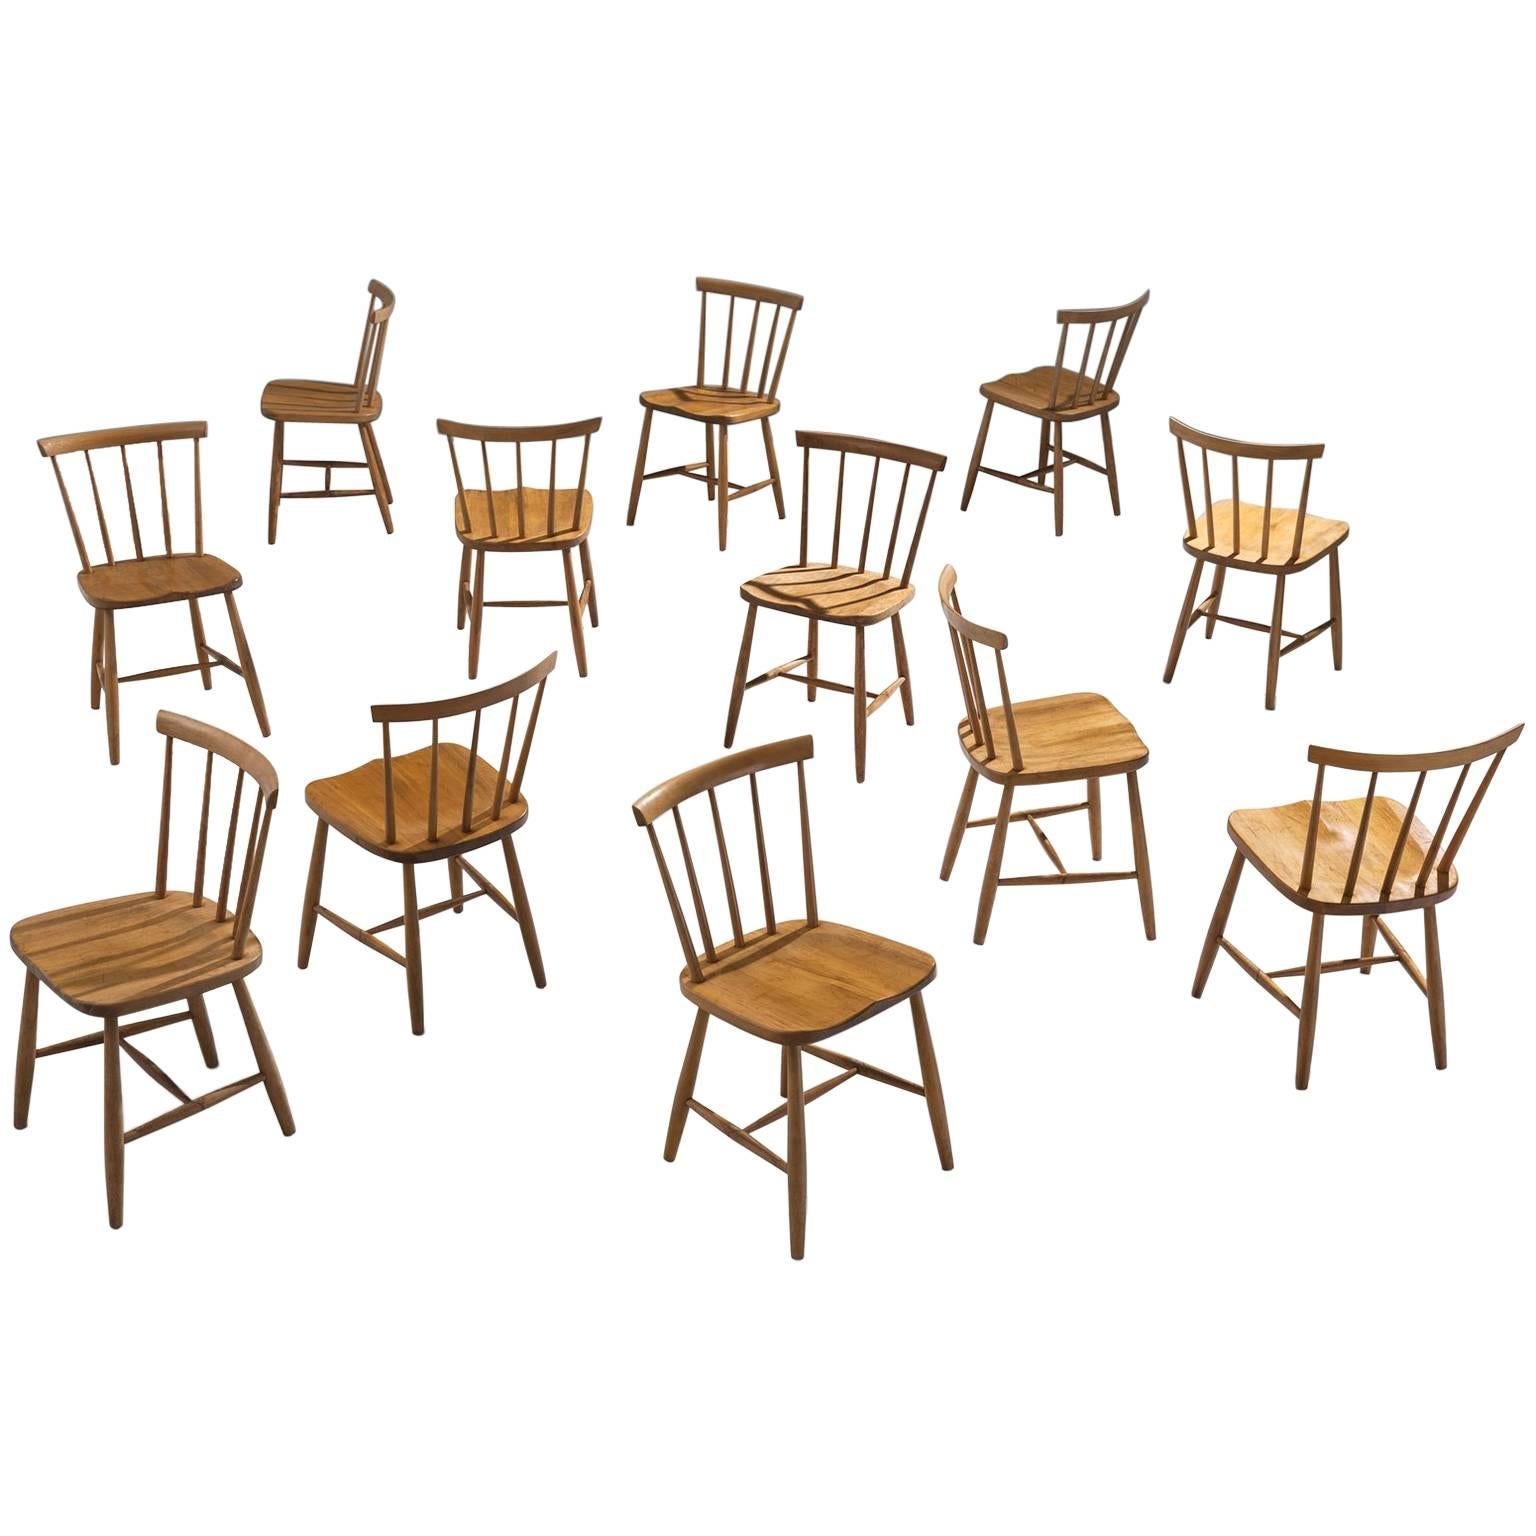 Large set of Ercol Beech Dining Chairs